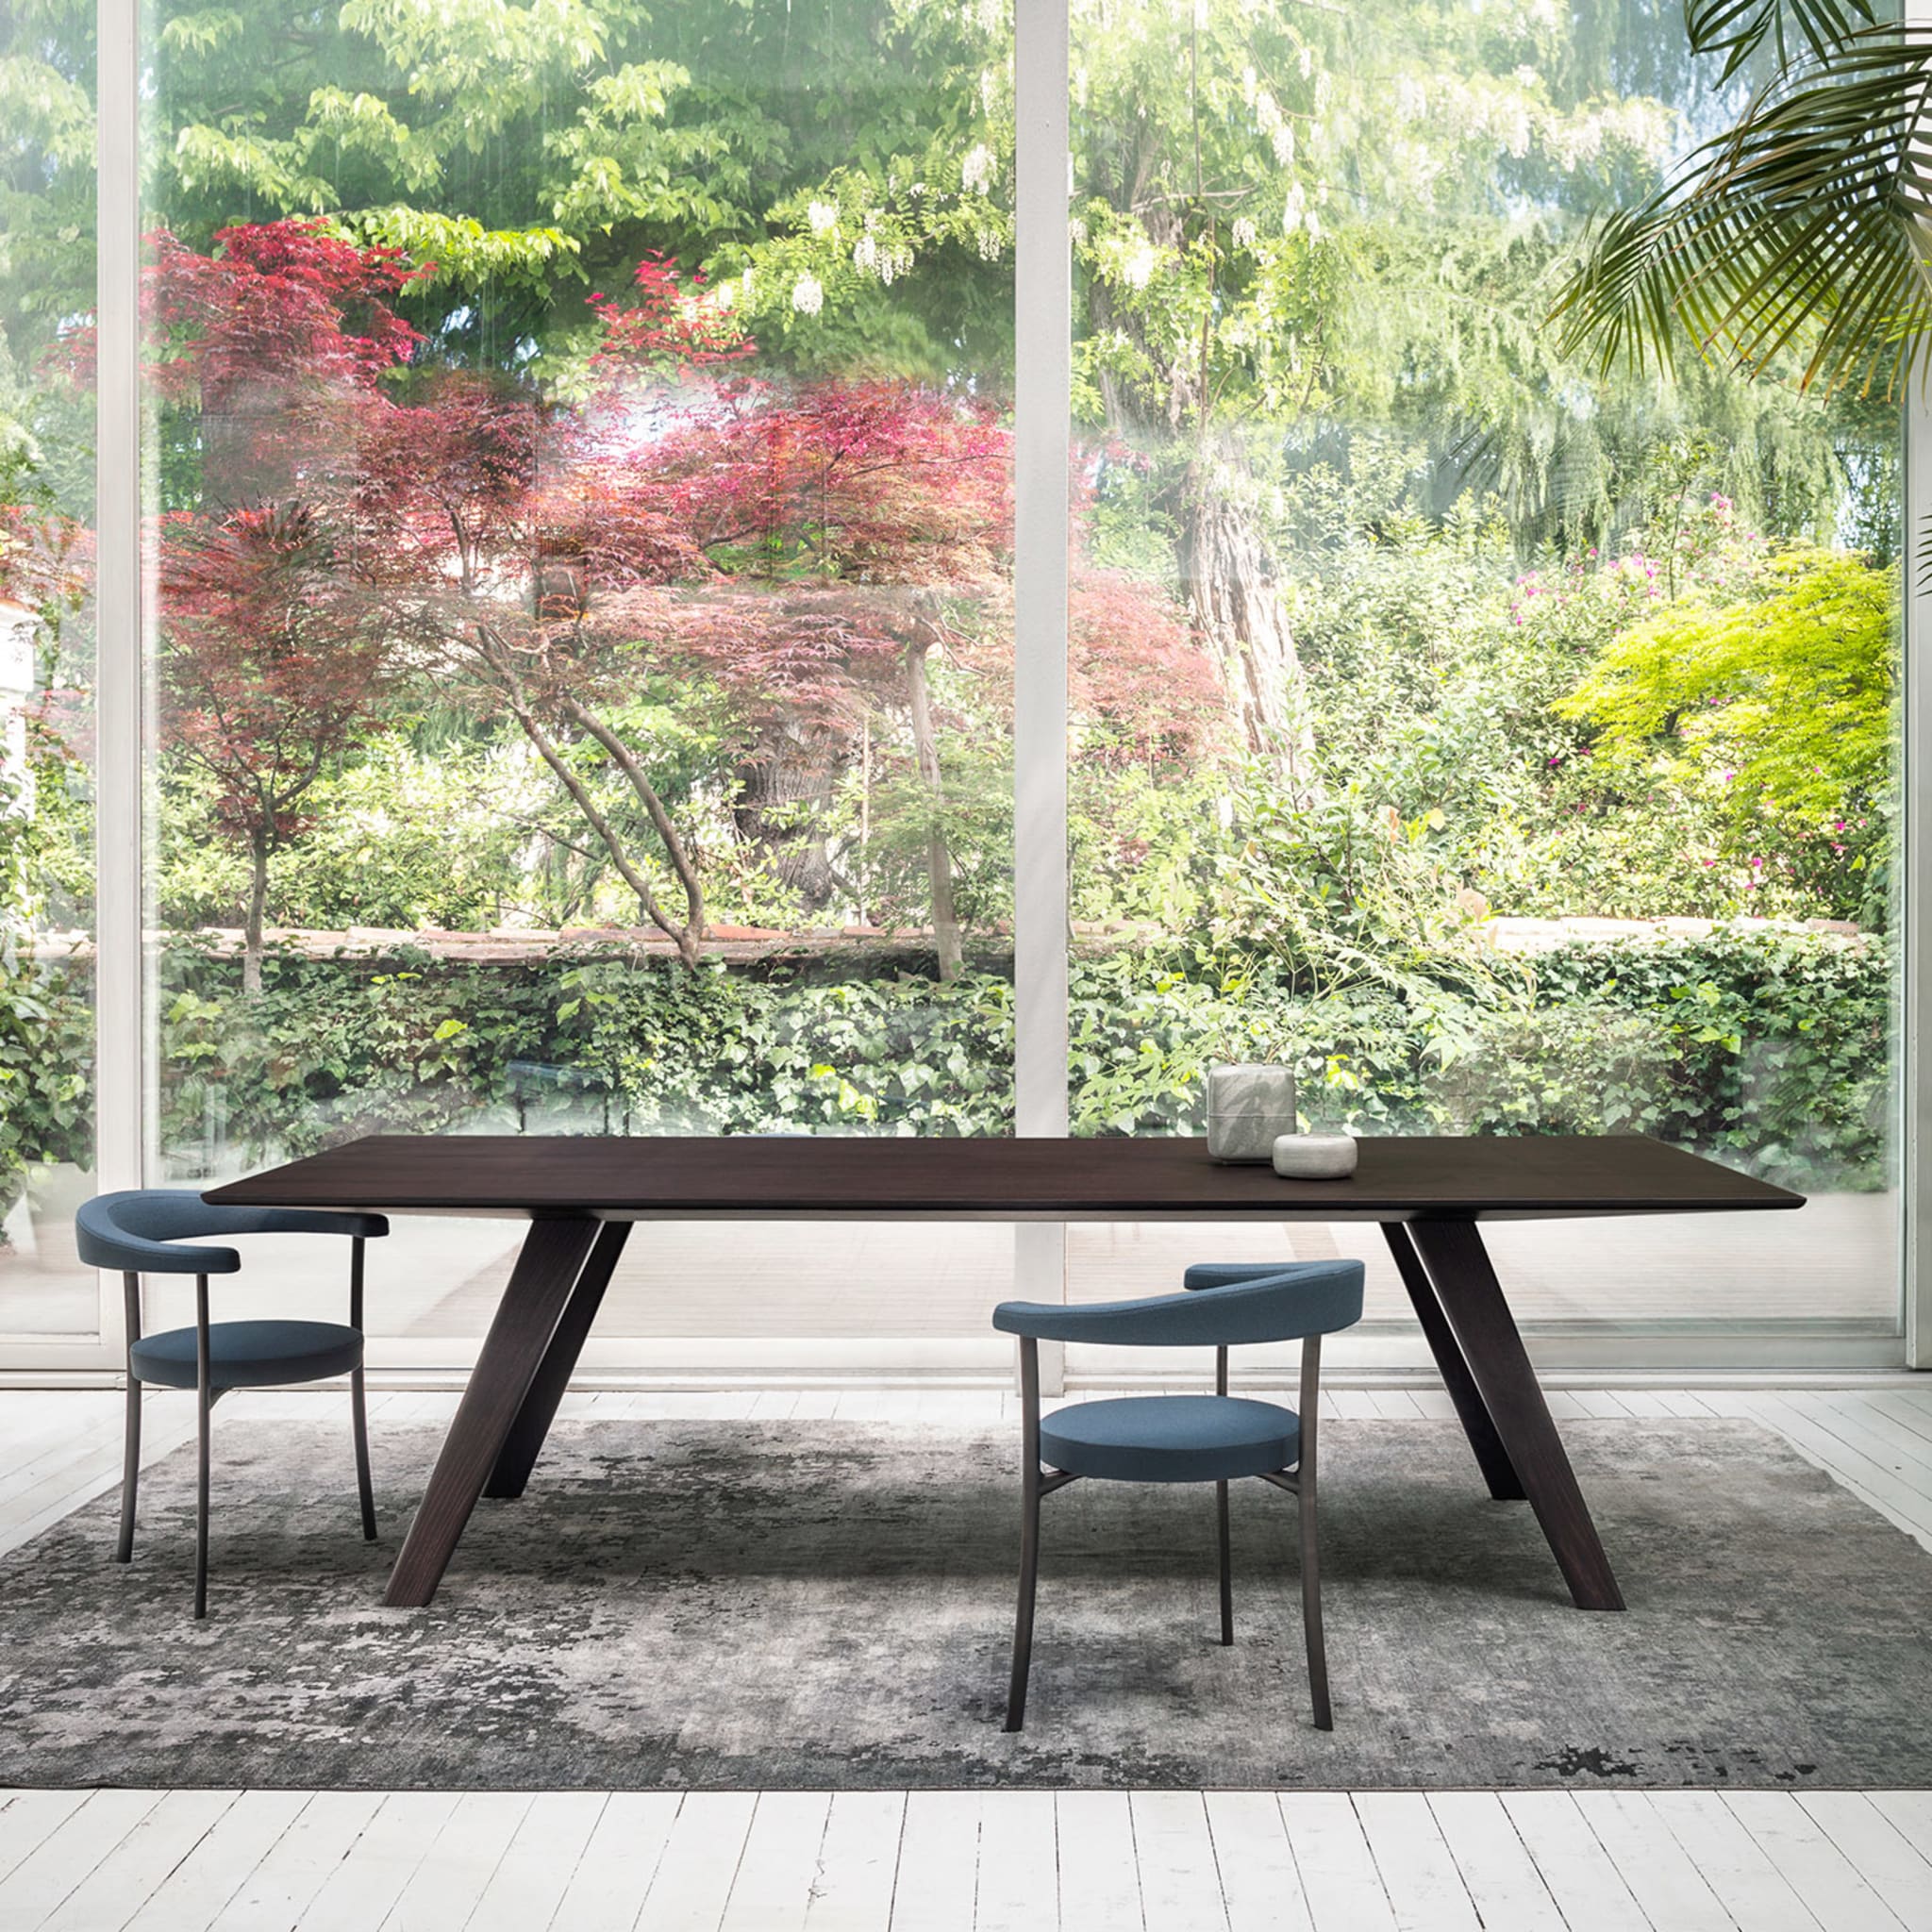 Locust Brown Dining Table by Stefano Giovannoni - Alternative view 1